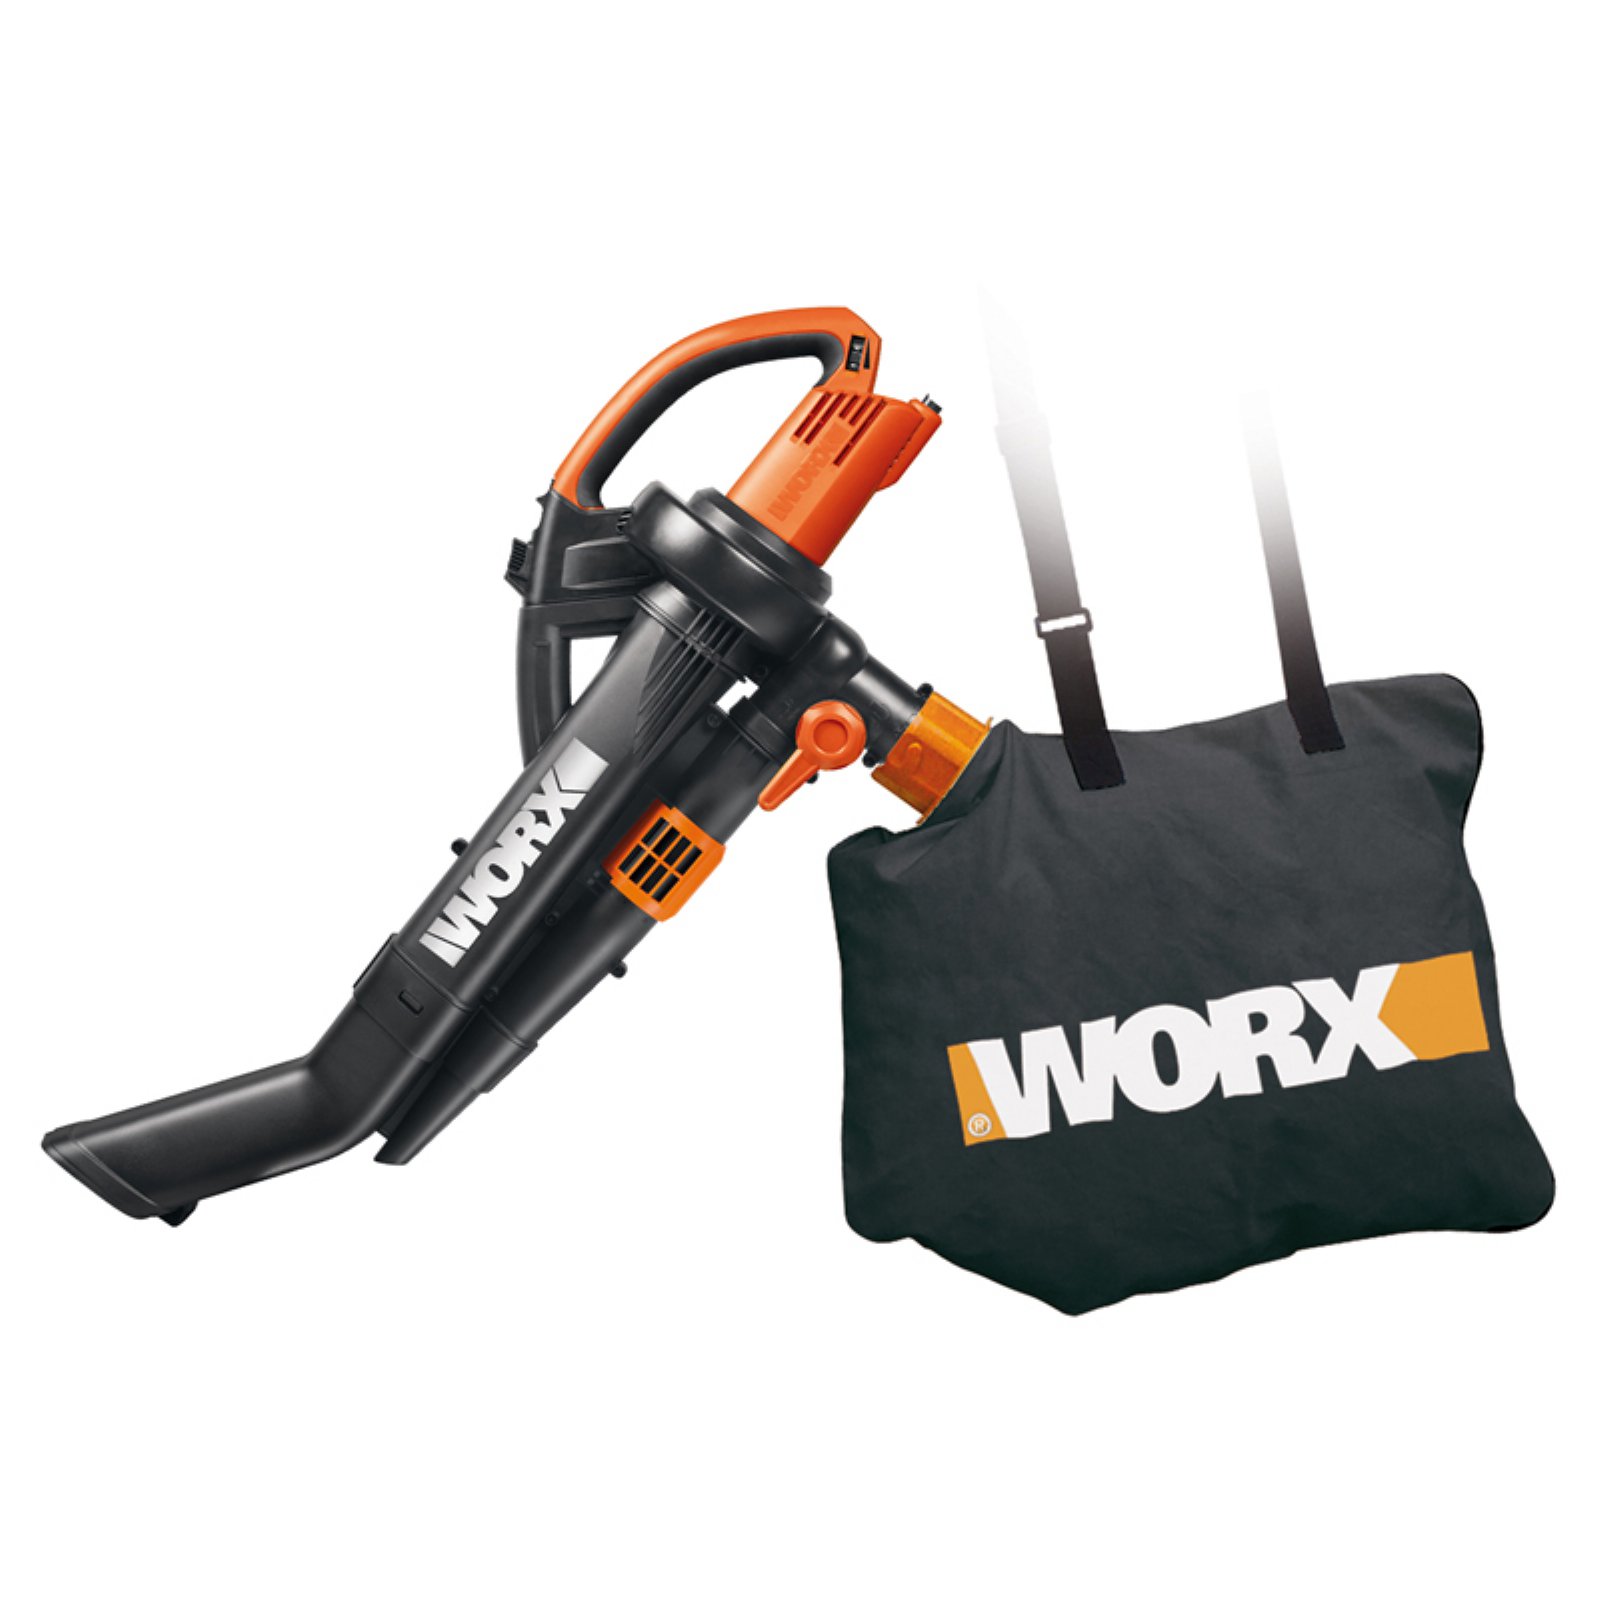 Worx TriVac Blower / Mulcher / Vacuum with All-Metal Mulching System - image 2 of 9